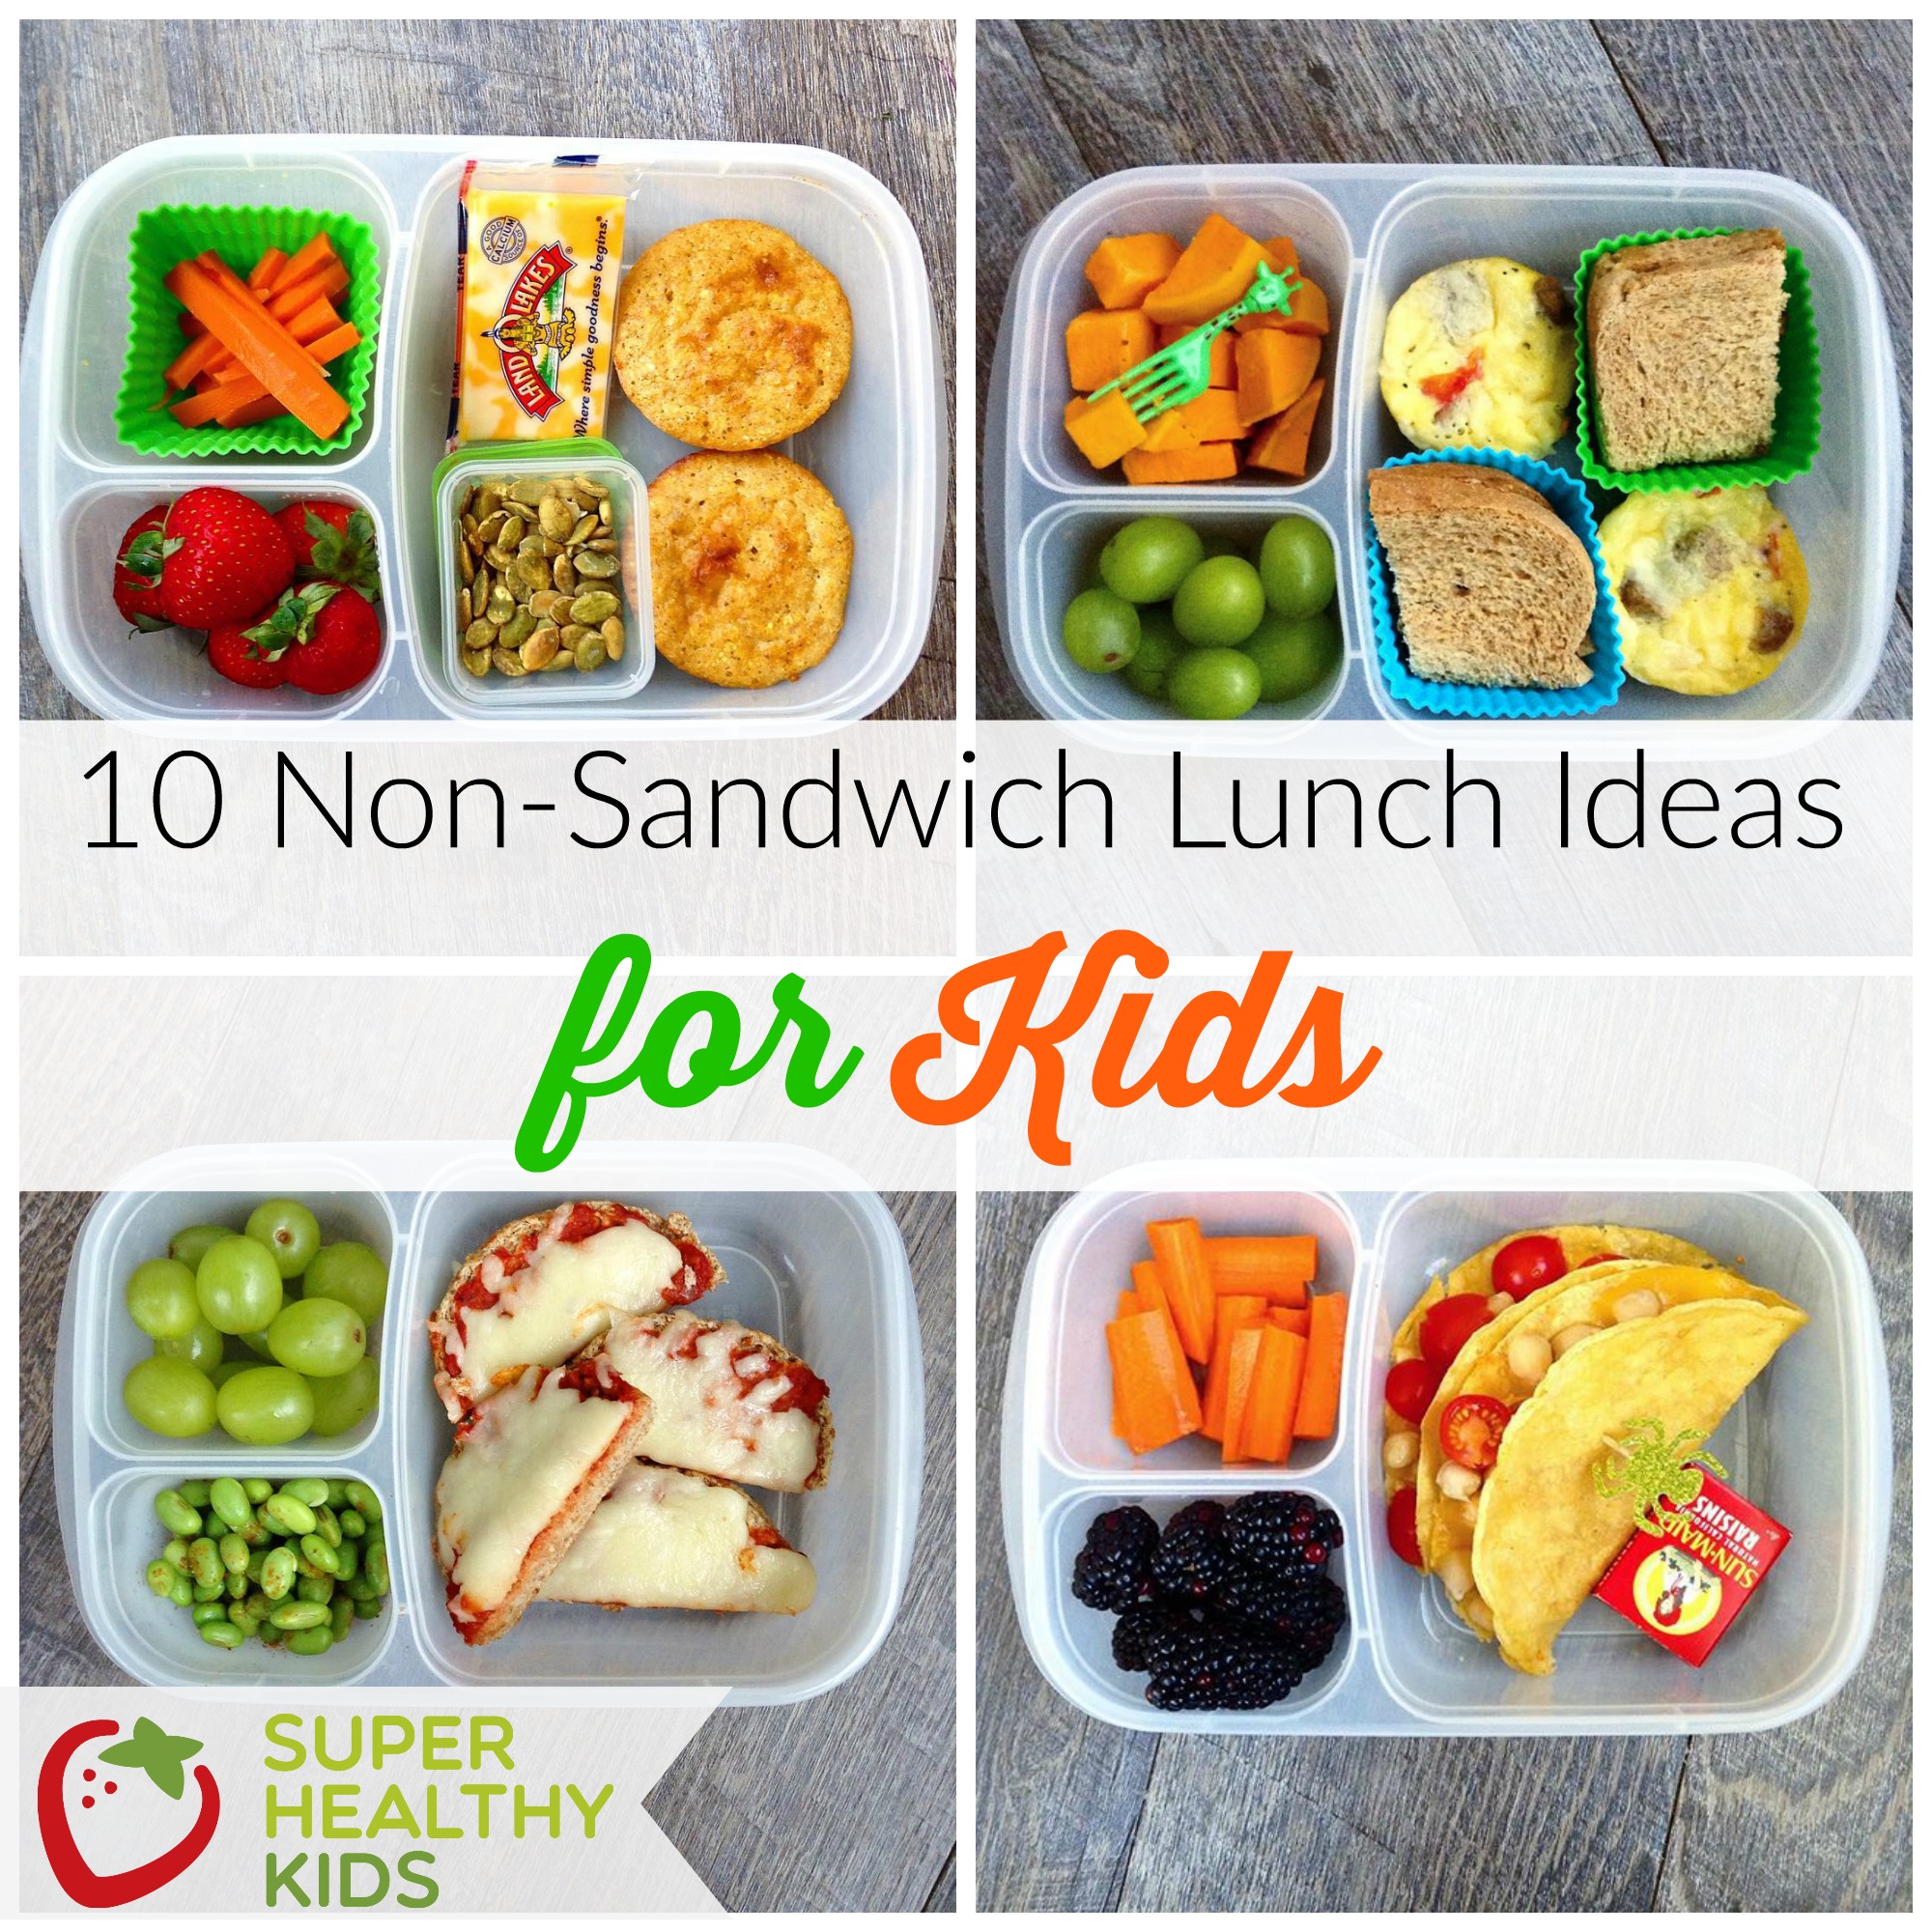 10 Non-Sandwich Lunch Ideas for Kids | Healthy Ideas for Kids